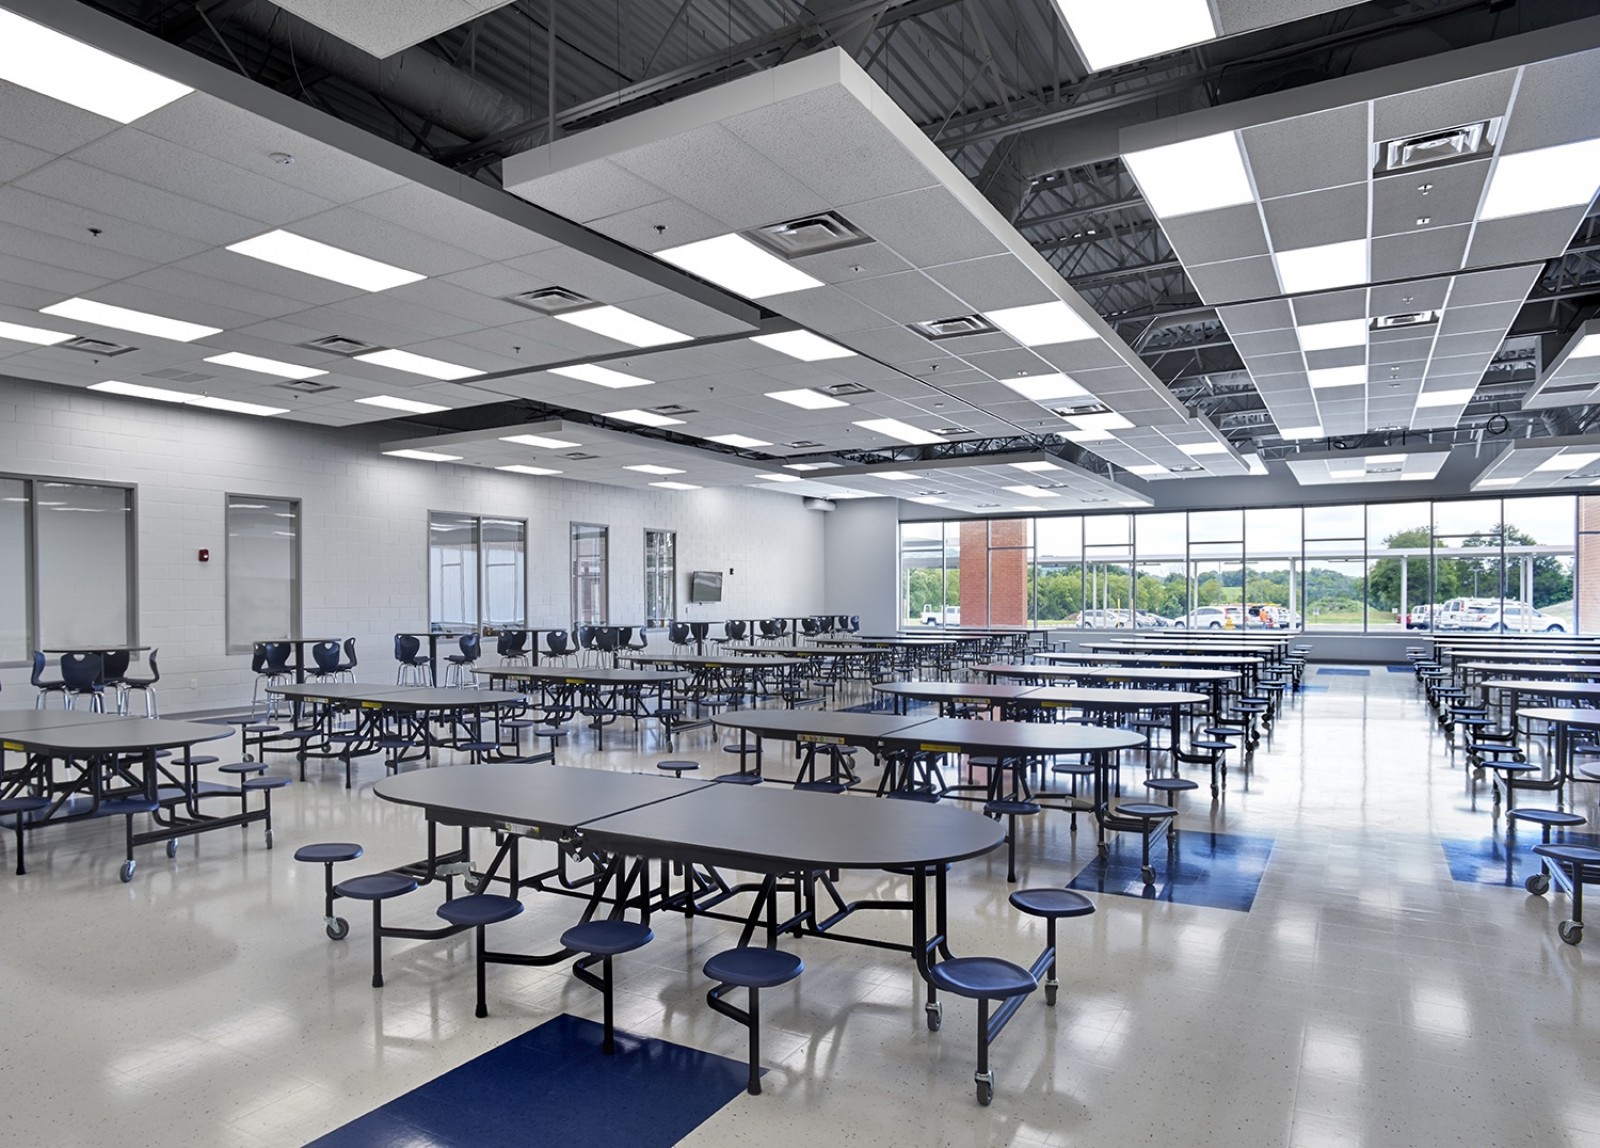 Hardin Valley Middle School - Cafeteria